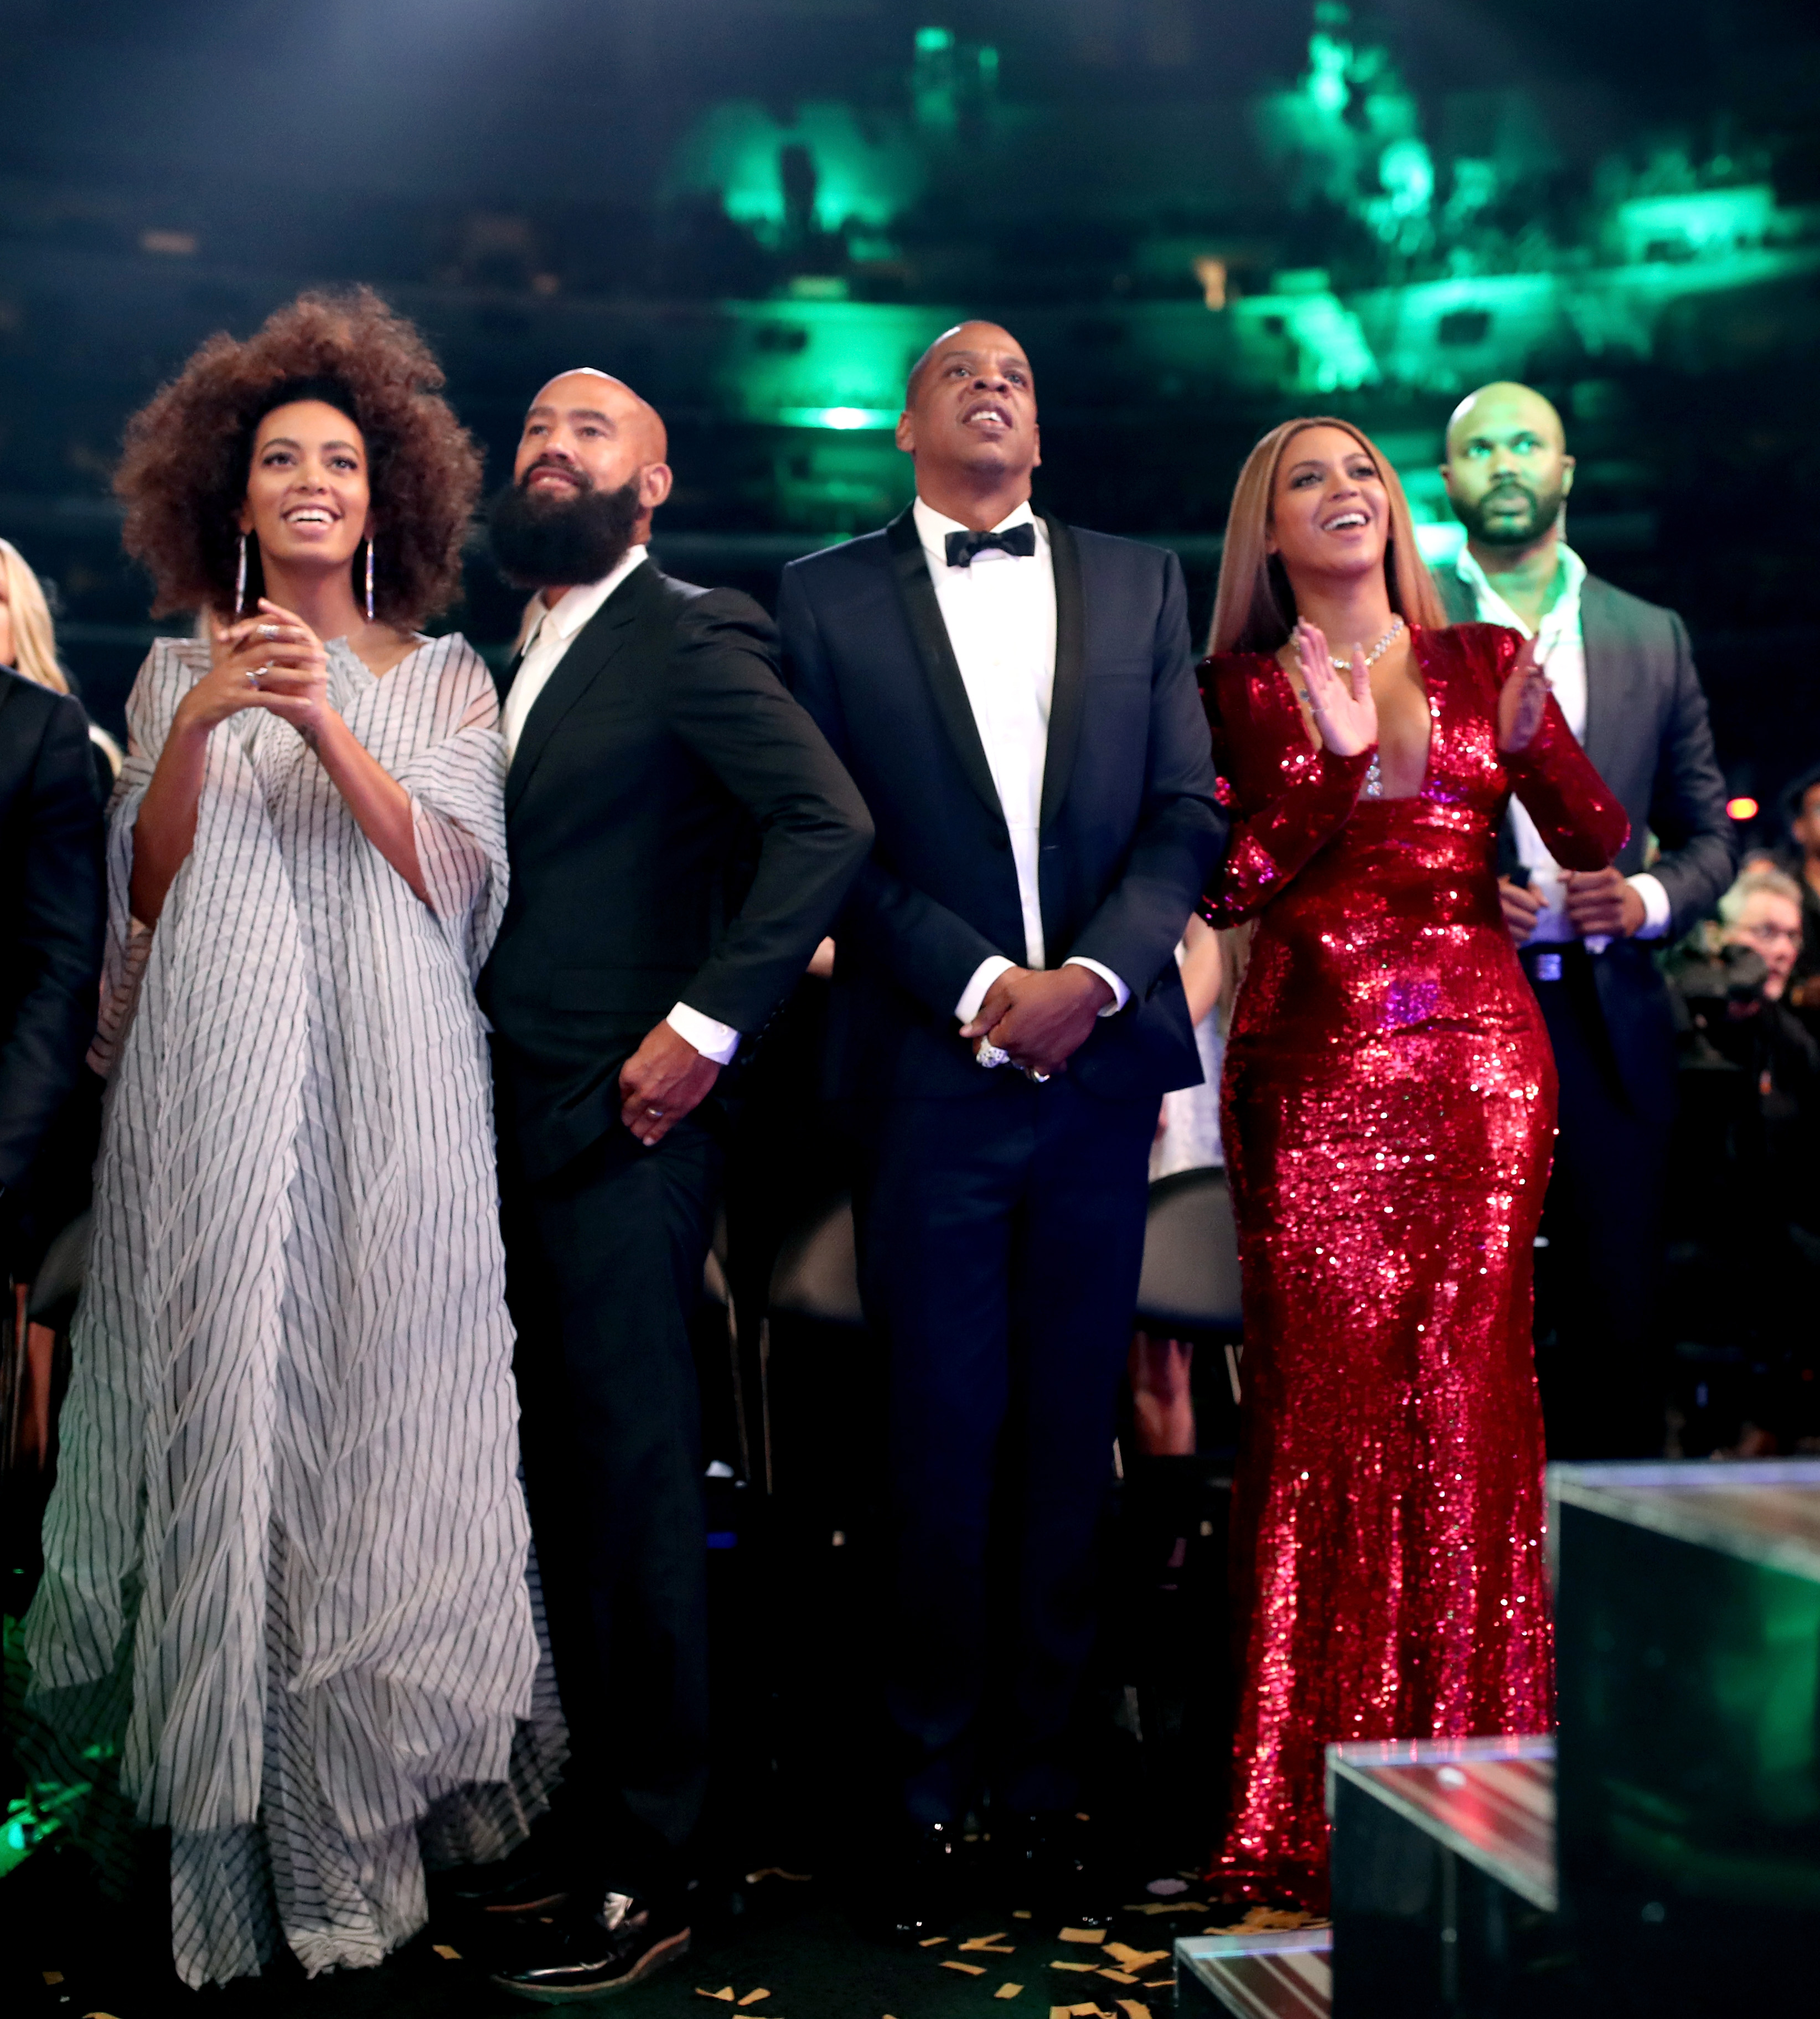 Solange Knowles, Alan Ferguson, Jay-Z, and Beyonce at the 59th Grammy Awards, Staples Center, February 12, 2017, Los Angeles, California | Source: Getty Images